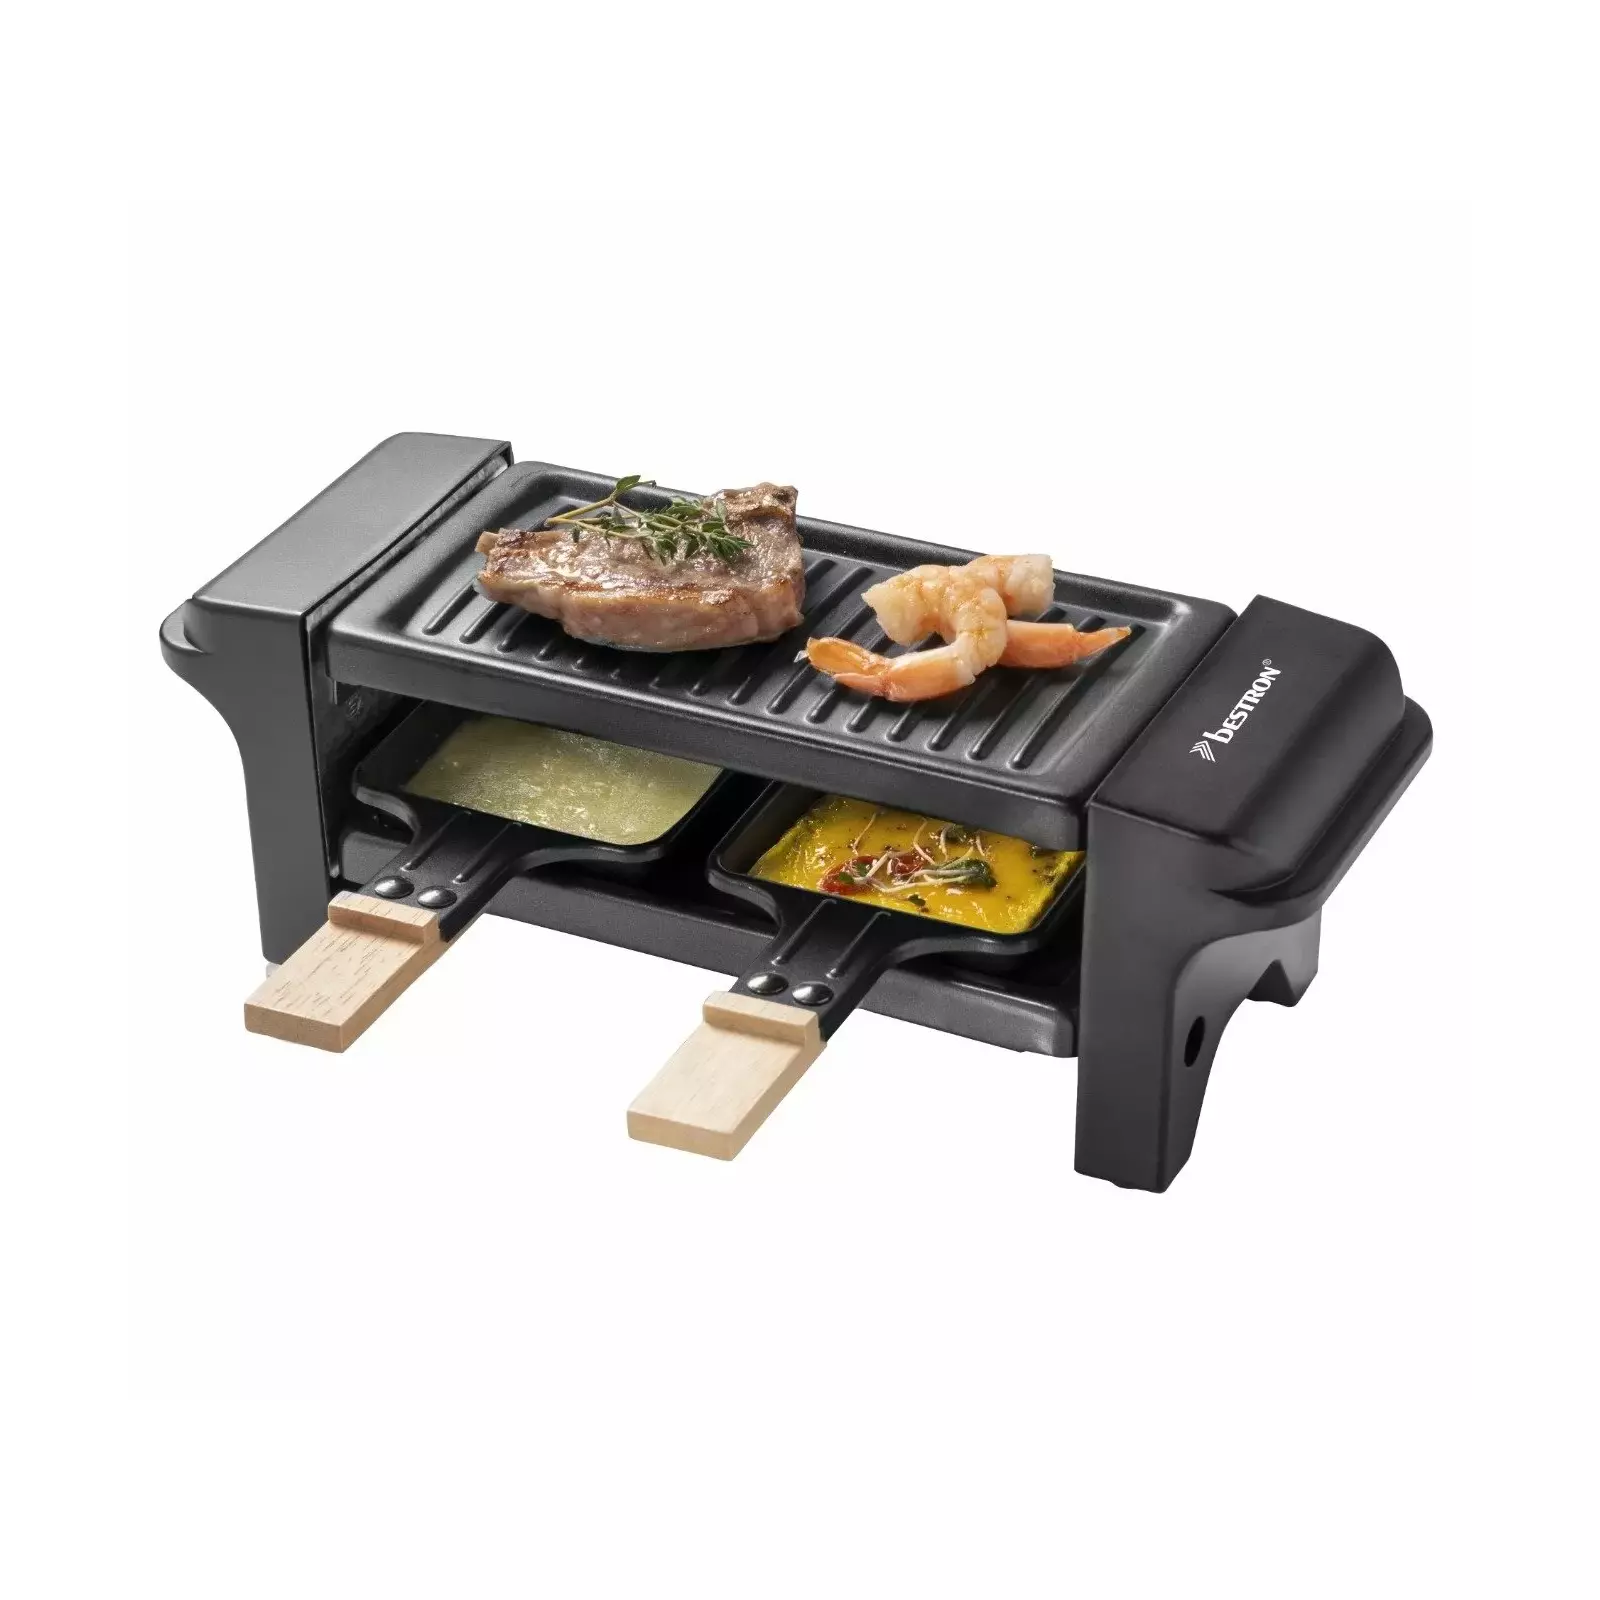 Delegeren leven Transistor Bestron ARG150BW raclette grill 2 ARG150BW | Grill | AiO.lv